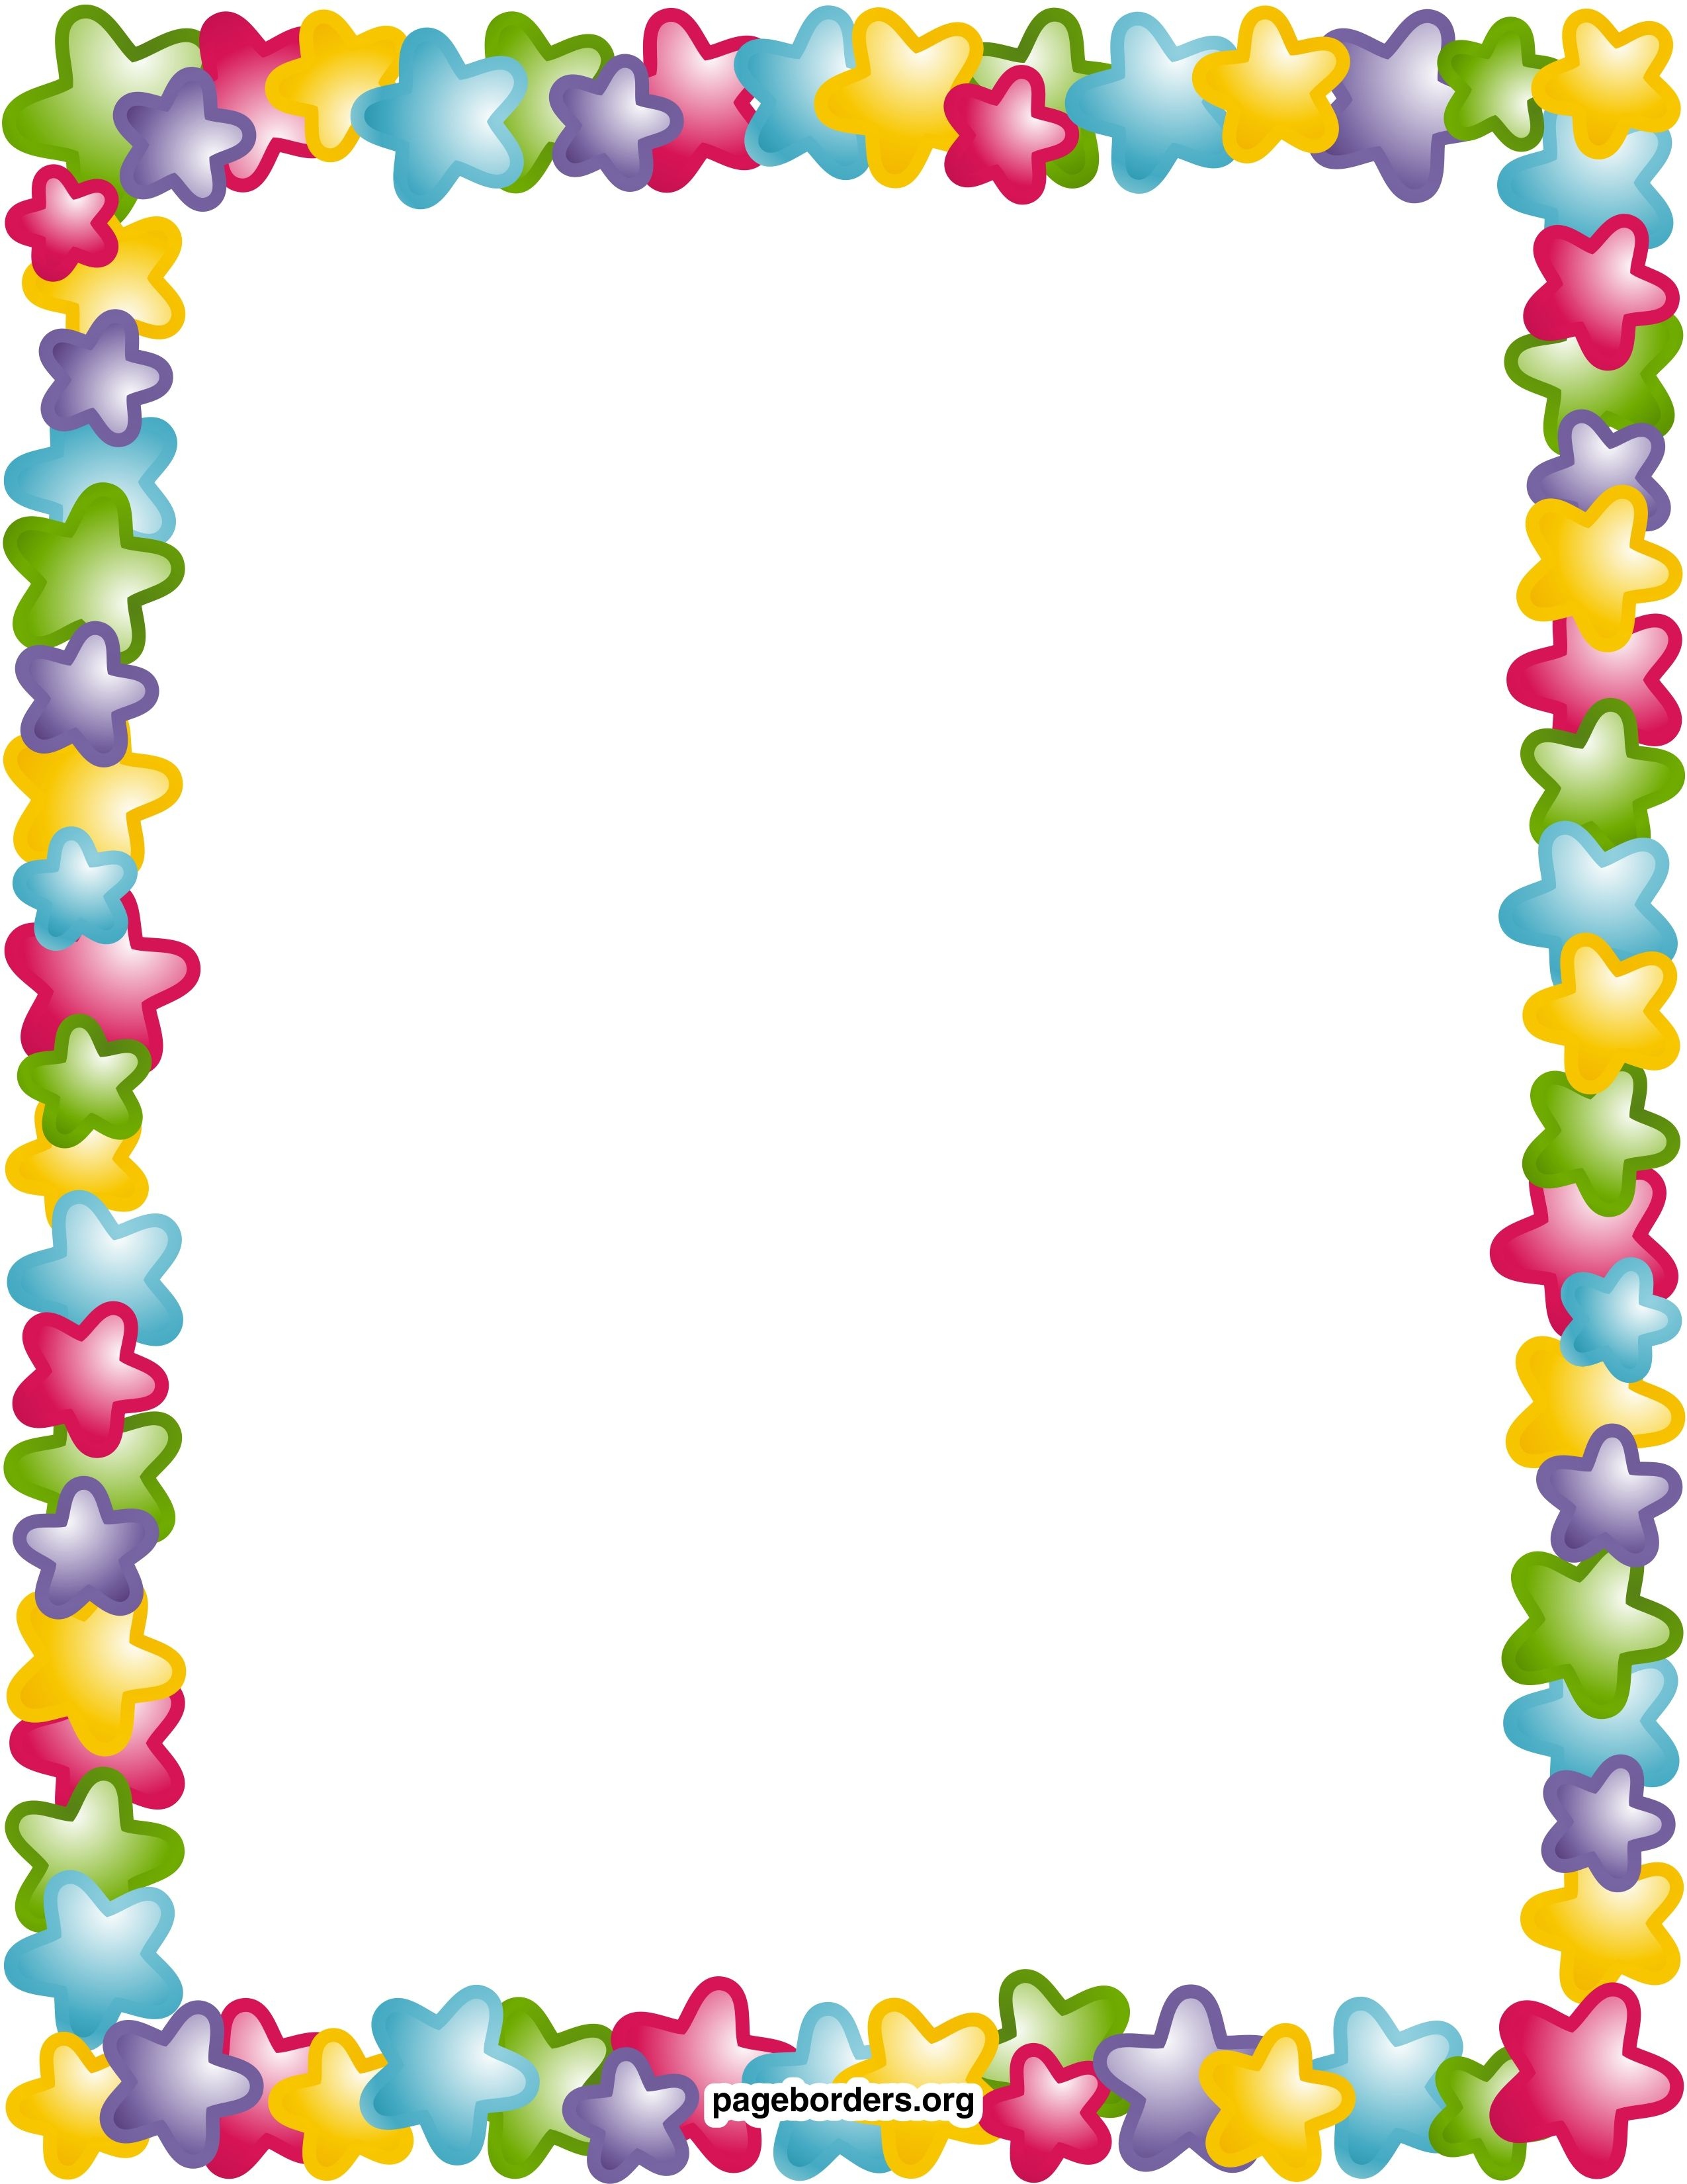 Free Printable Page Borders And Frames Image Gallery - Photonesta - Free Printable School Stationery Borders